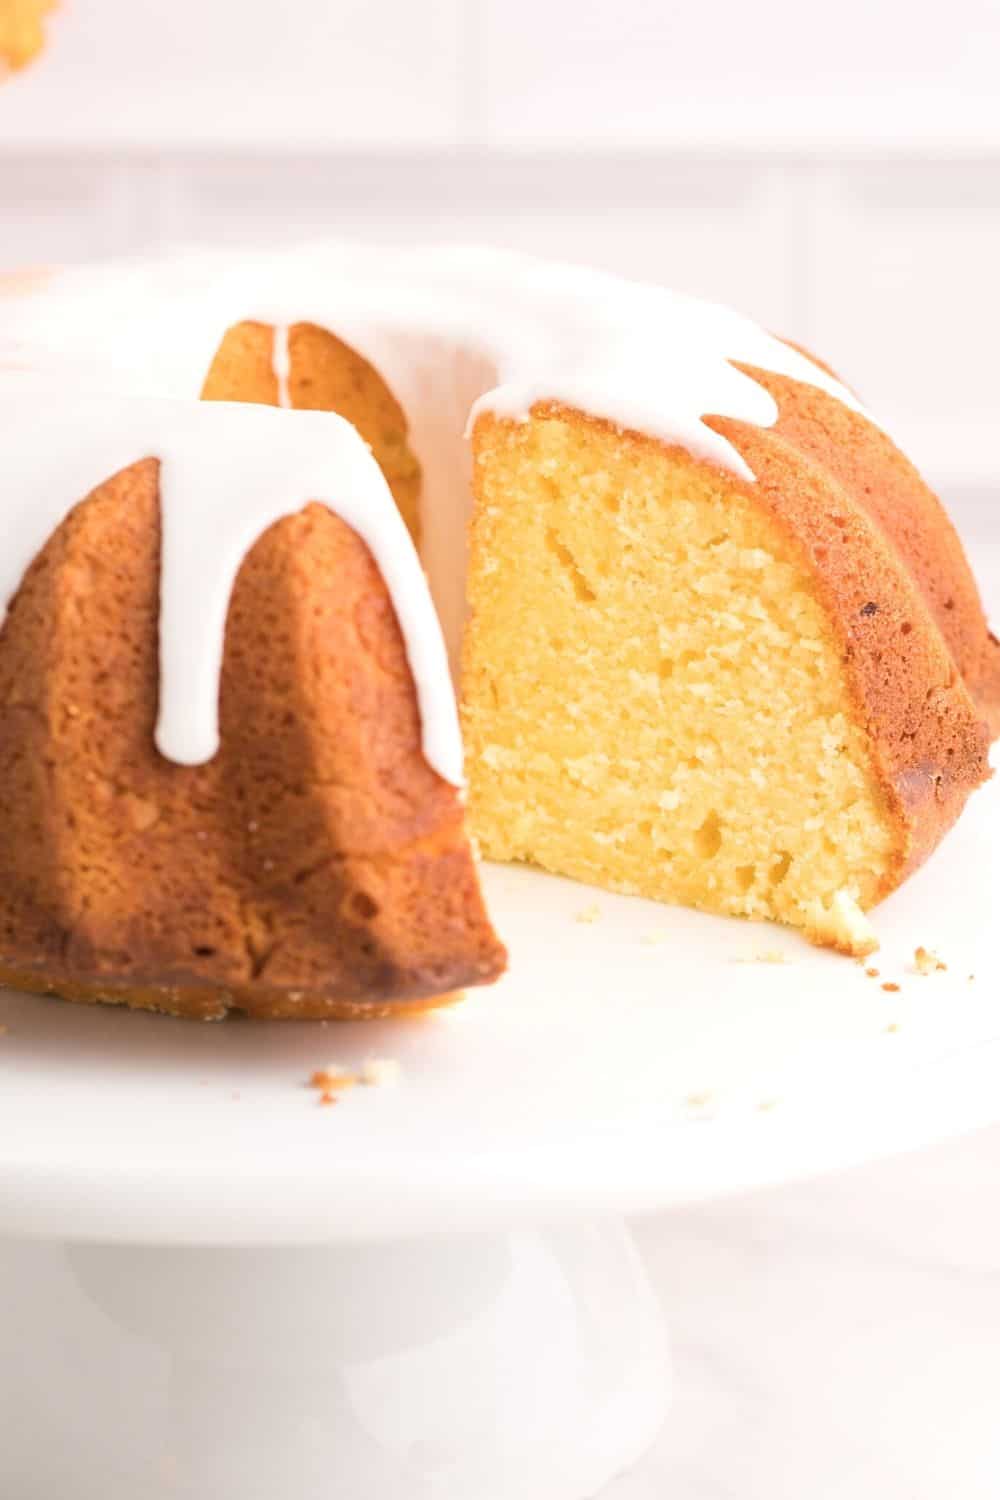 close-up view of the inside of a lemon pound cake made with sour cream, showing how moist the inside is.